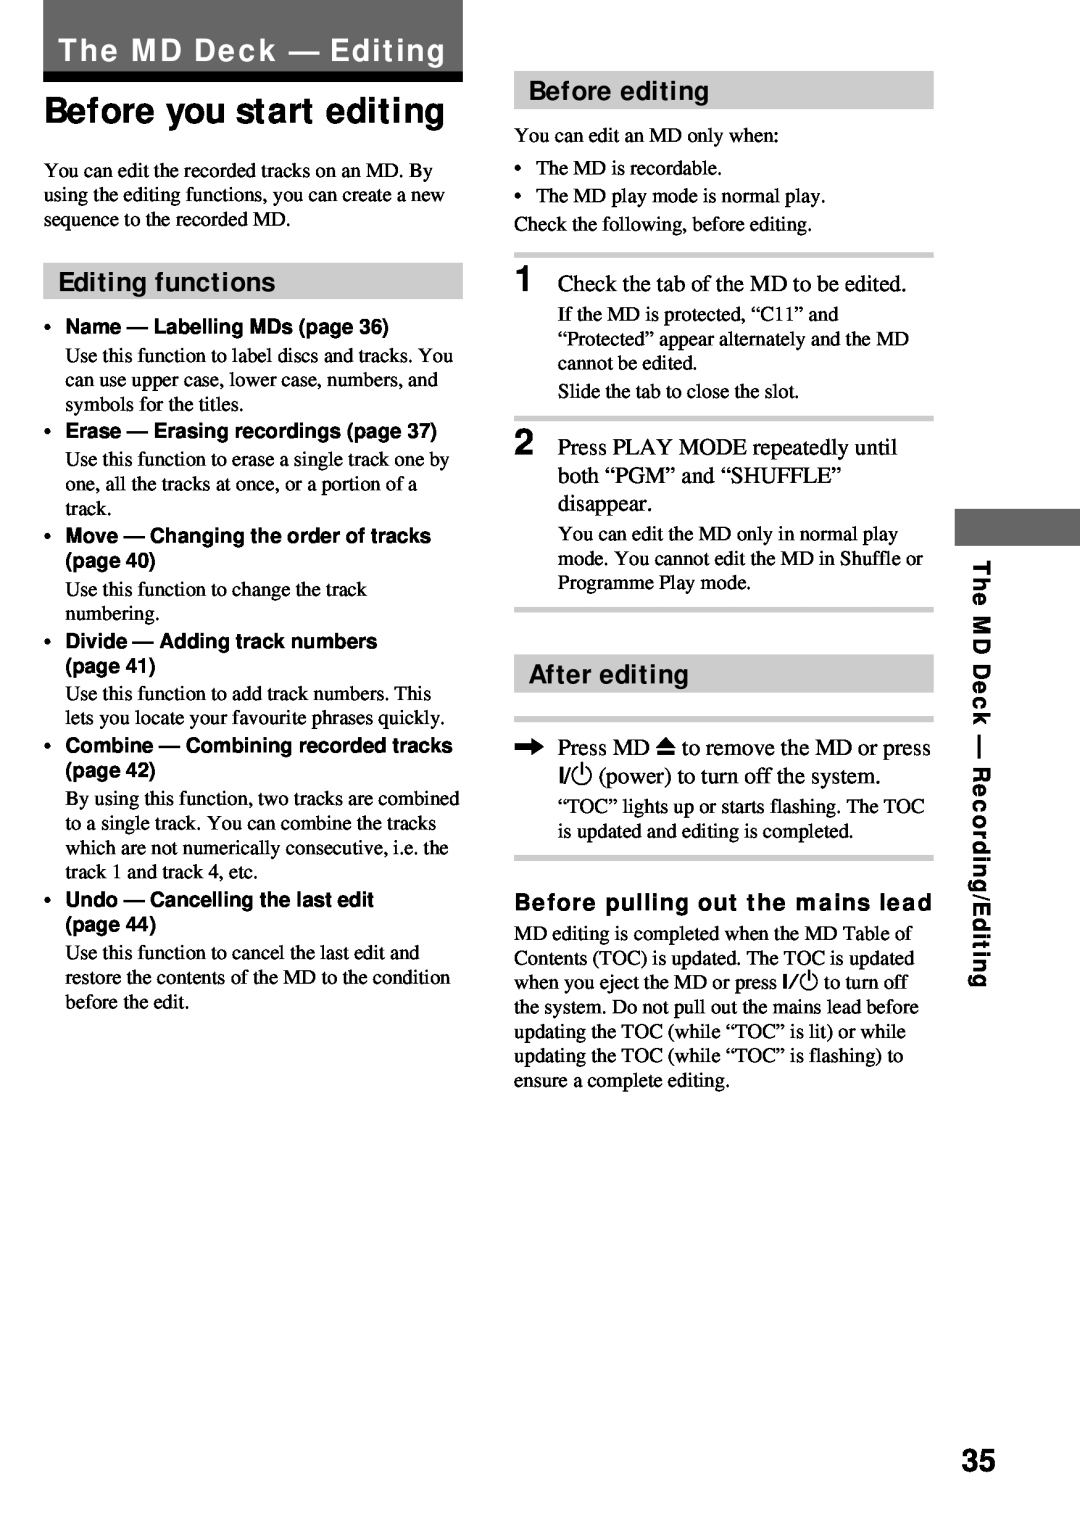 Sony DHC-MD373 manual Before you start editing, The MD Deck - Editing, Editing functions, Before editing, After editing 